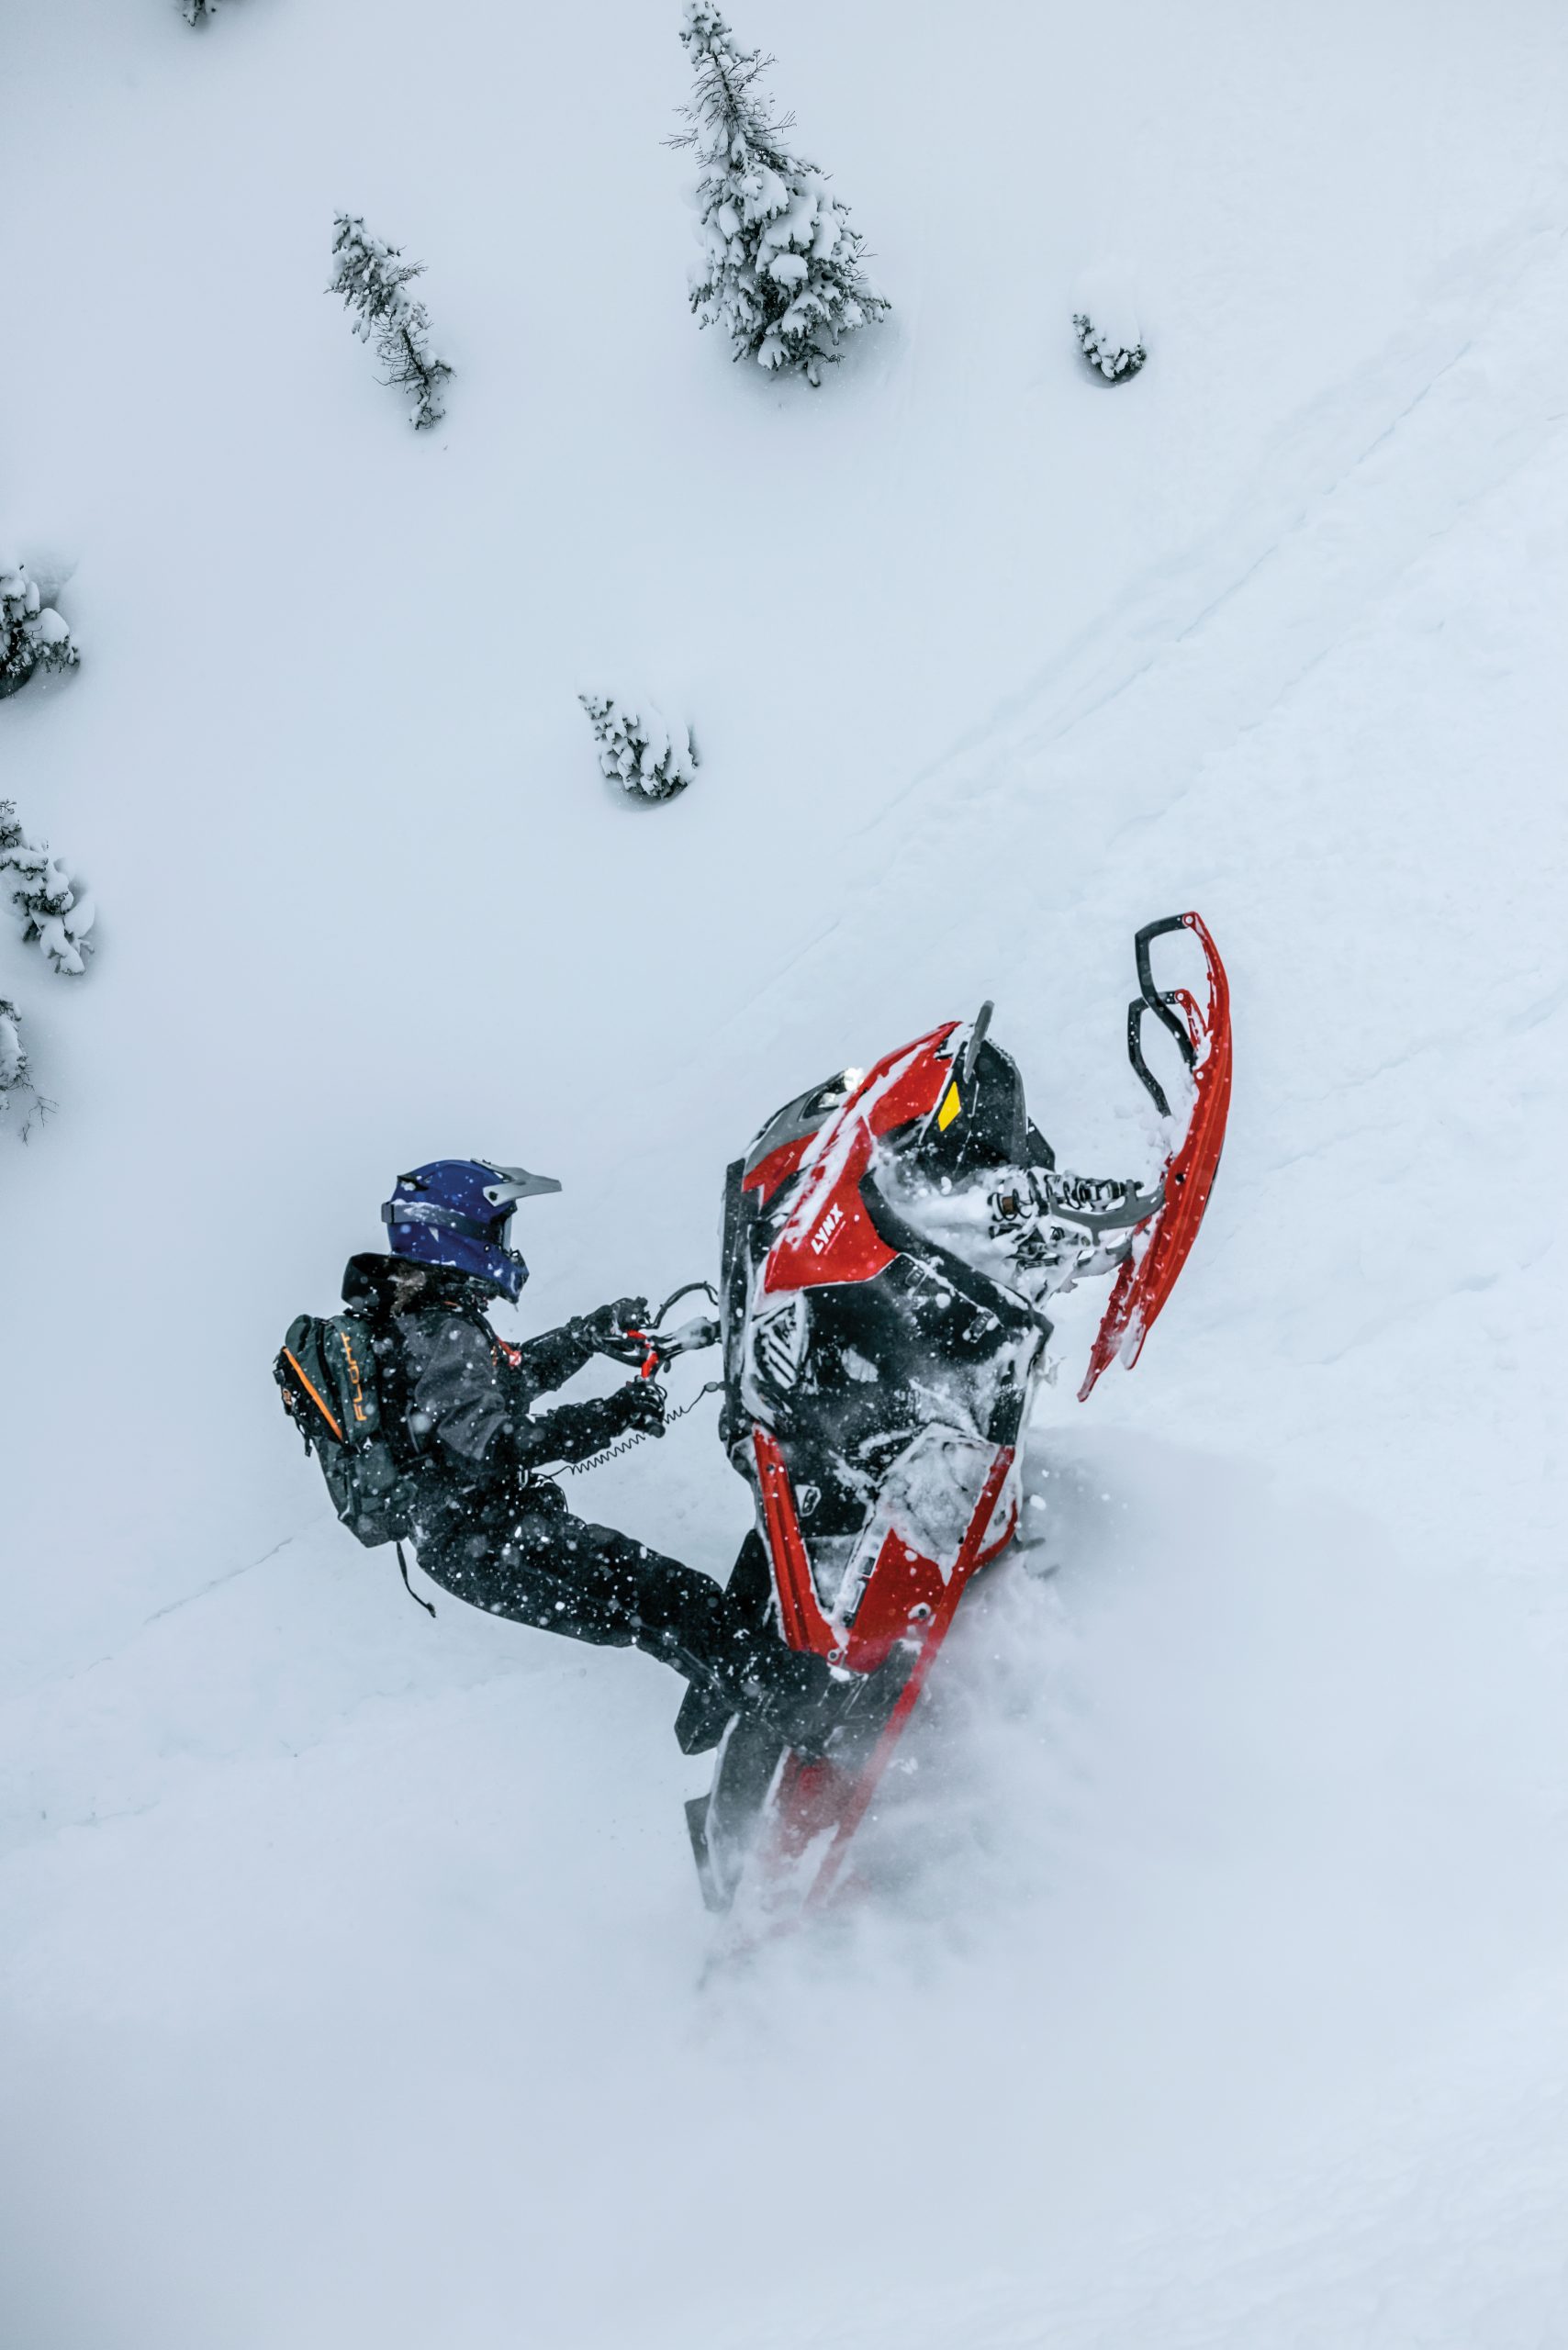 On Snow Magazine (OSM) Ski-Doo 2023 Doo-ing it again! No stopping the #1  sled manufacturer with a new chassis, tech, and more! - On Snow Magazine  (OSM)